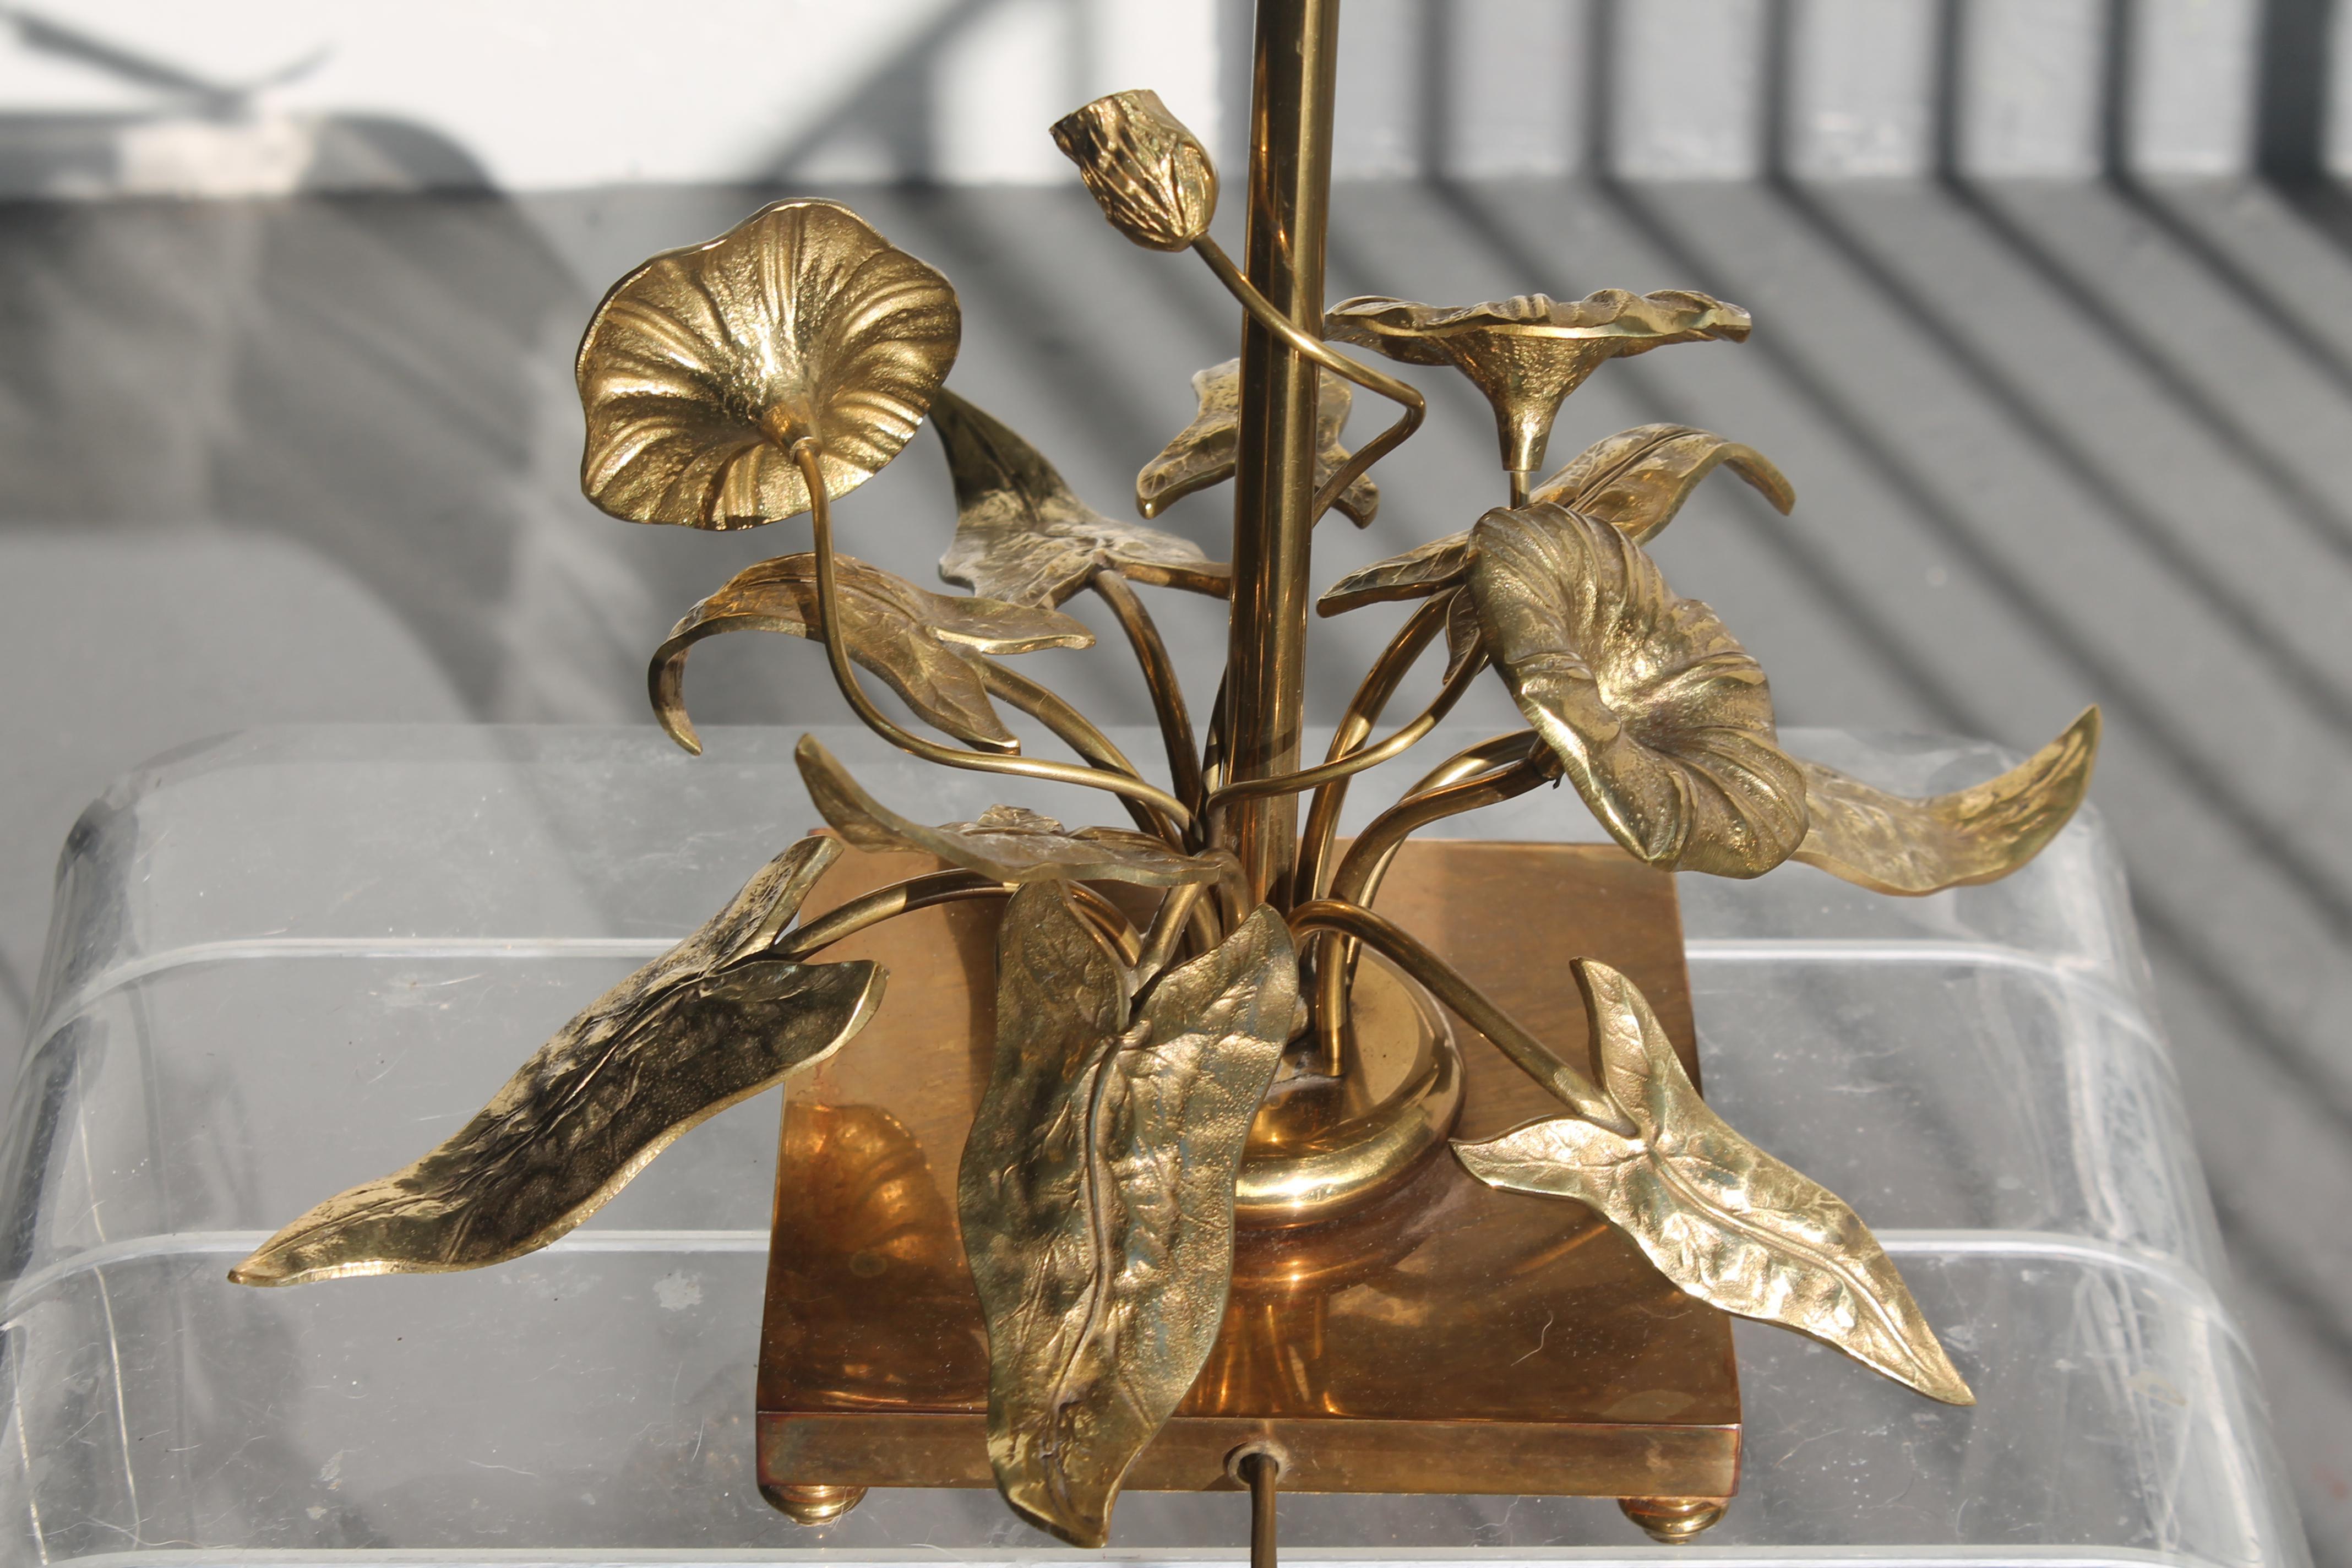 1960s French Mid Century Modern Gilt Bronze FloralTable Lamp att. Maison Charles In Good Condition For Sale In Opa Locka, FL